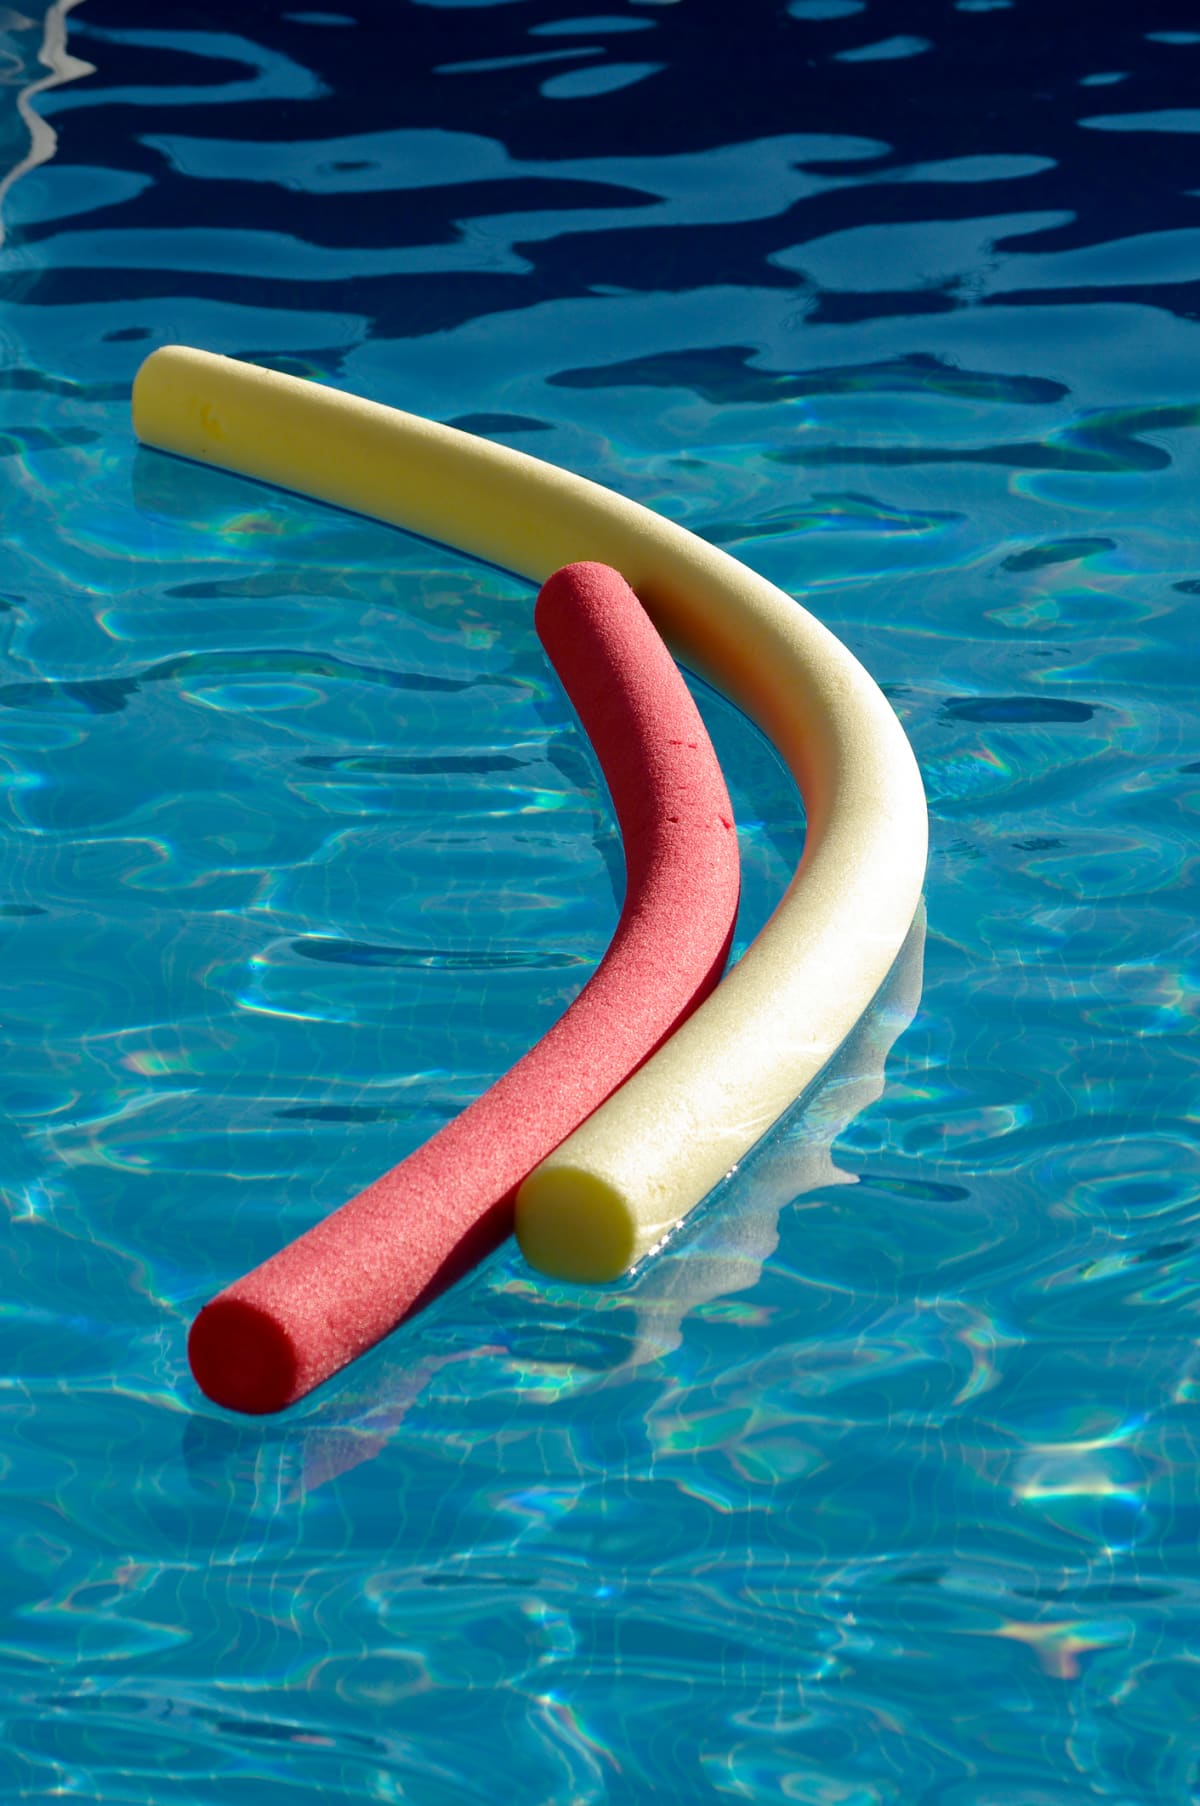 Colorful pool noodles floating in a sunlit swimming pool